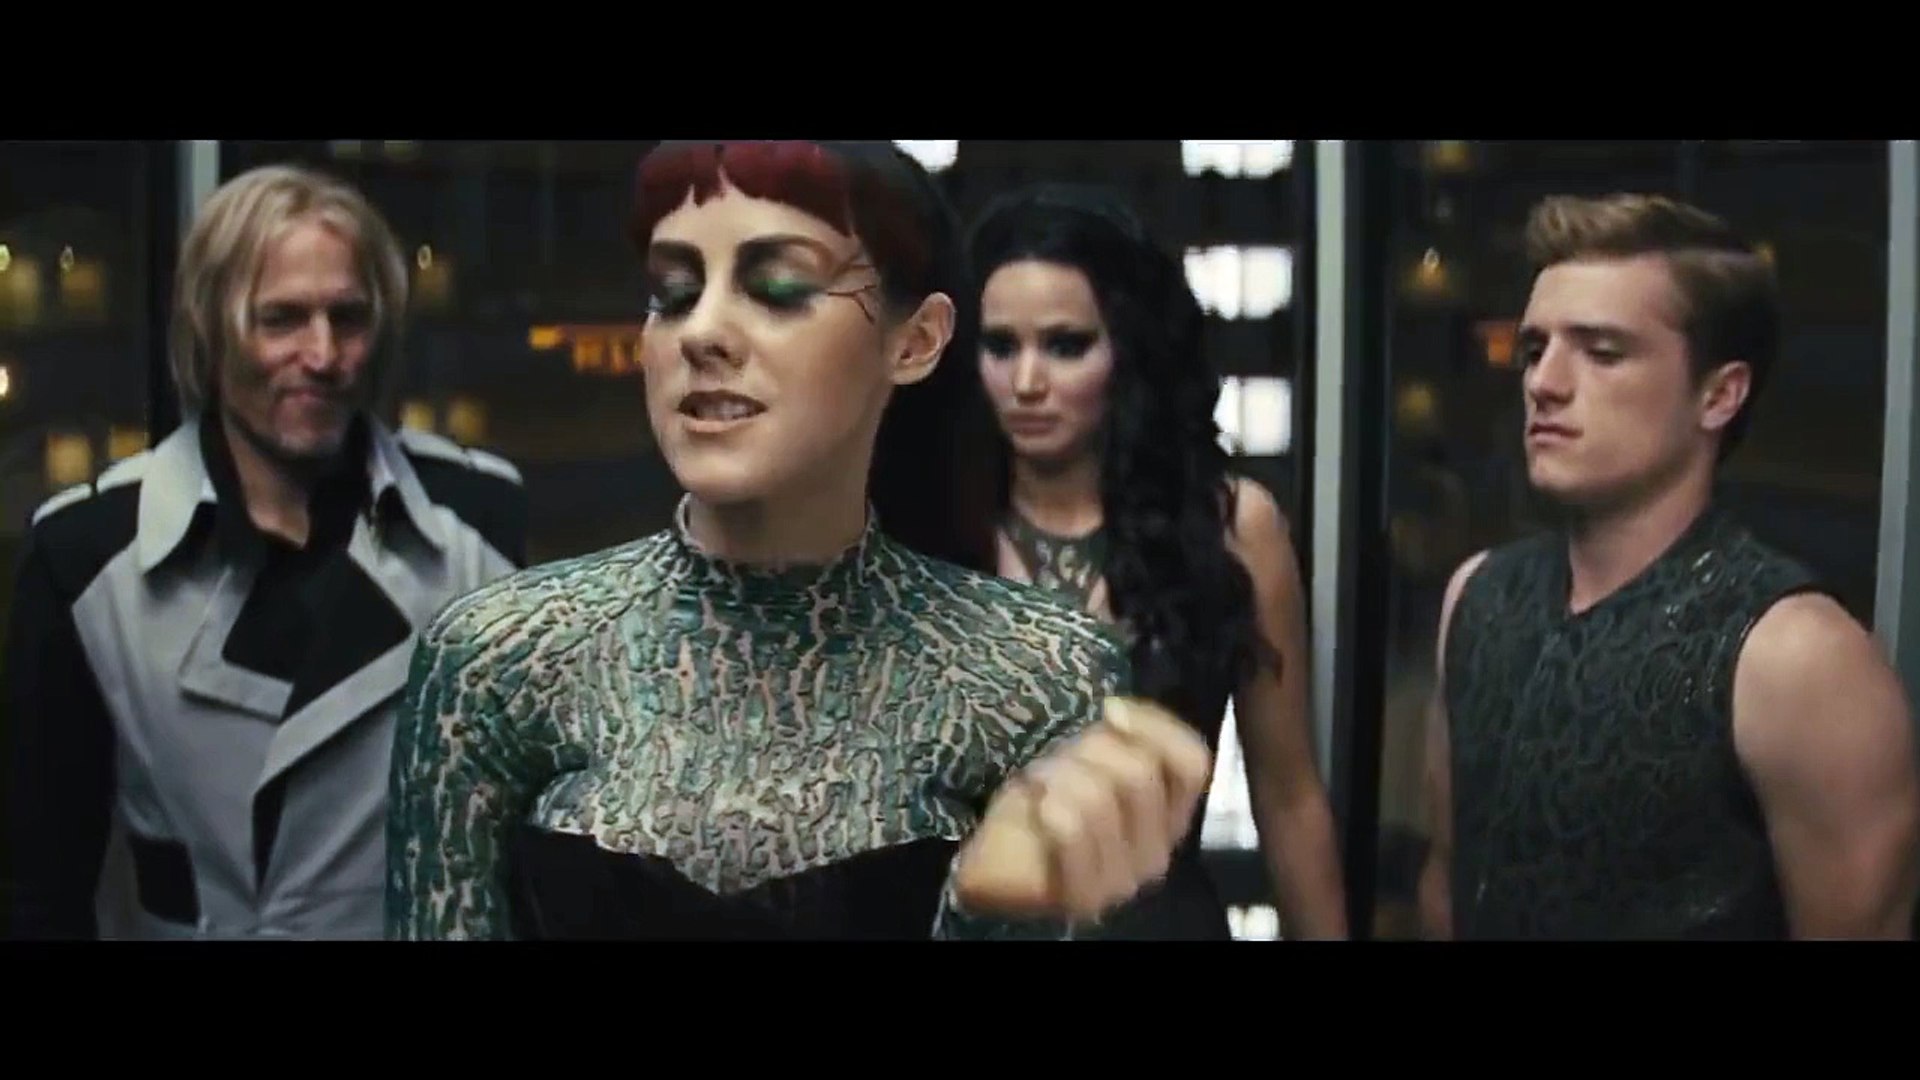 The Hunger Games: Catching Fire Movie CLIP #5 - Johanna in the Elevator  (2013) Movie HD - Dailymotion Video